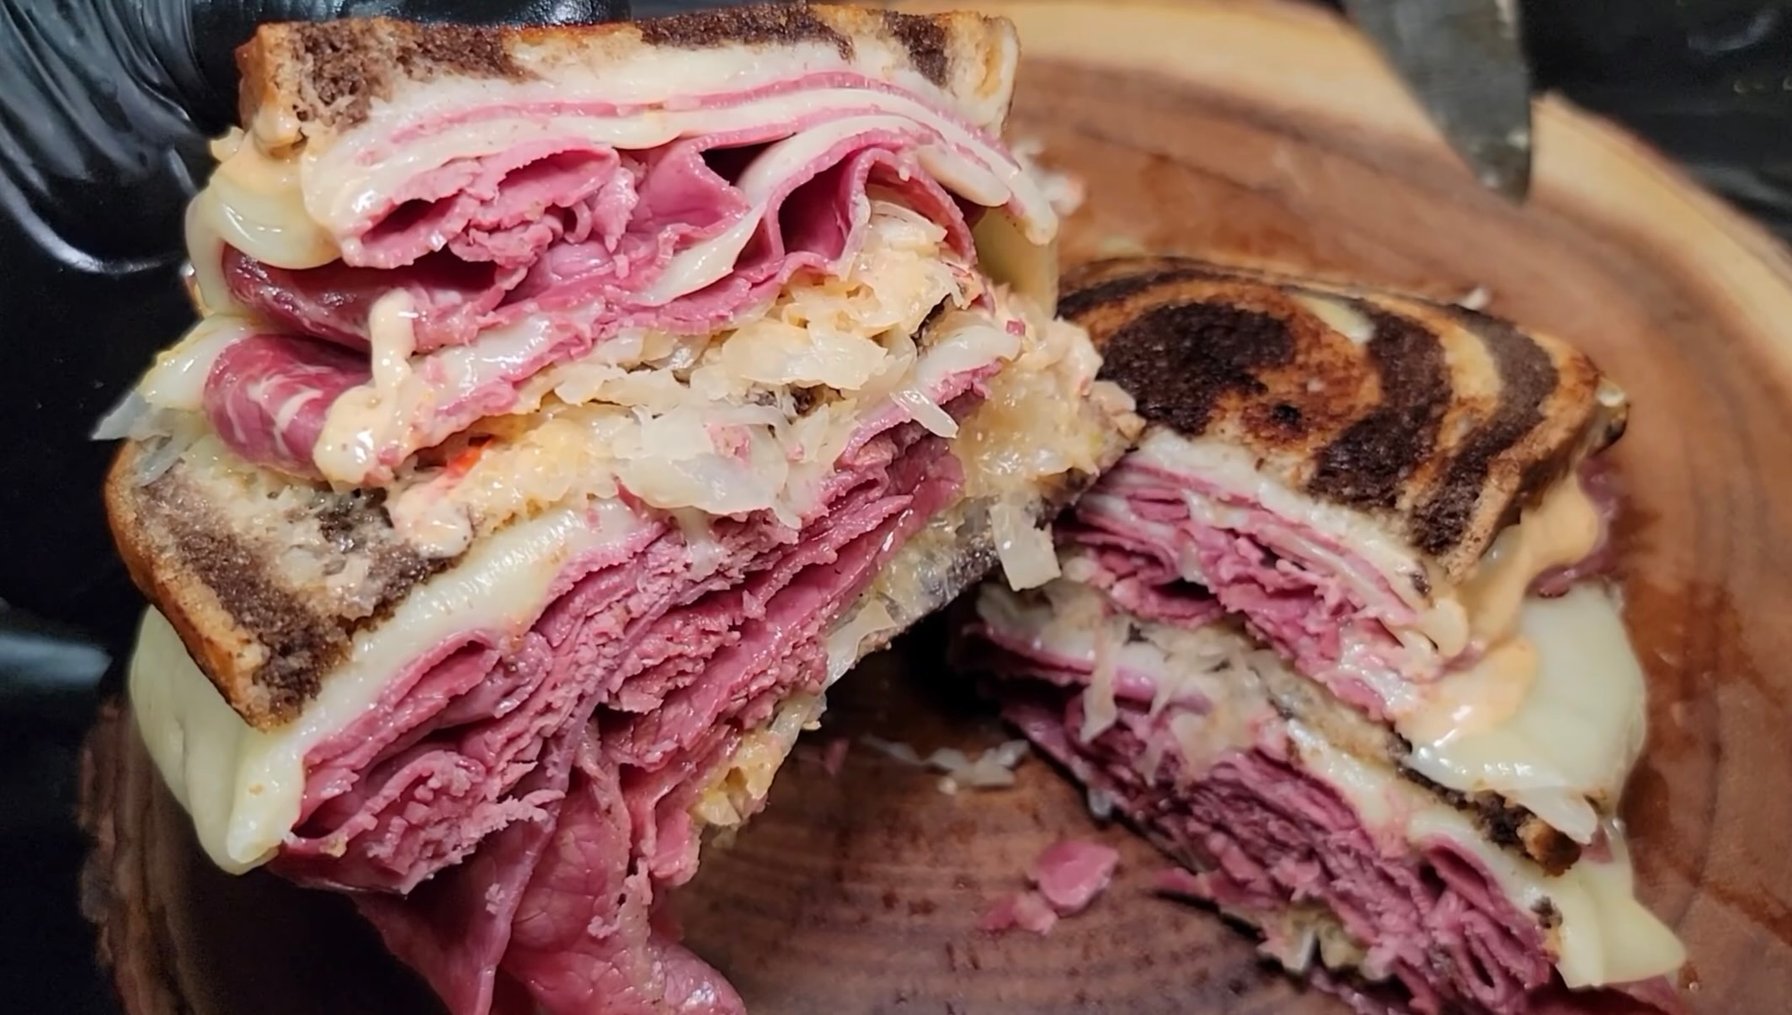 Classic Reuben sandwich on rye bread with corned beef, melted Swiss cheese, sauerkraut, and Russian dressing, served with pickles.